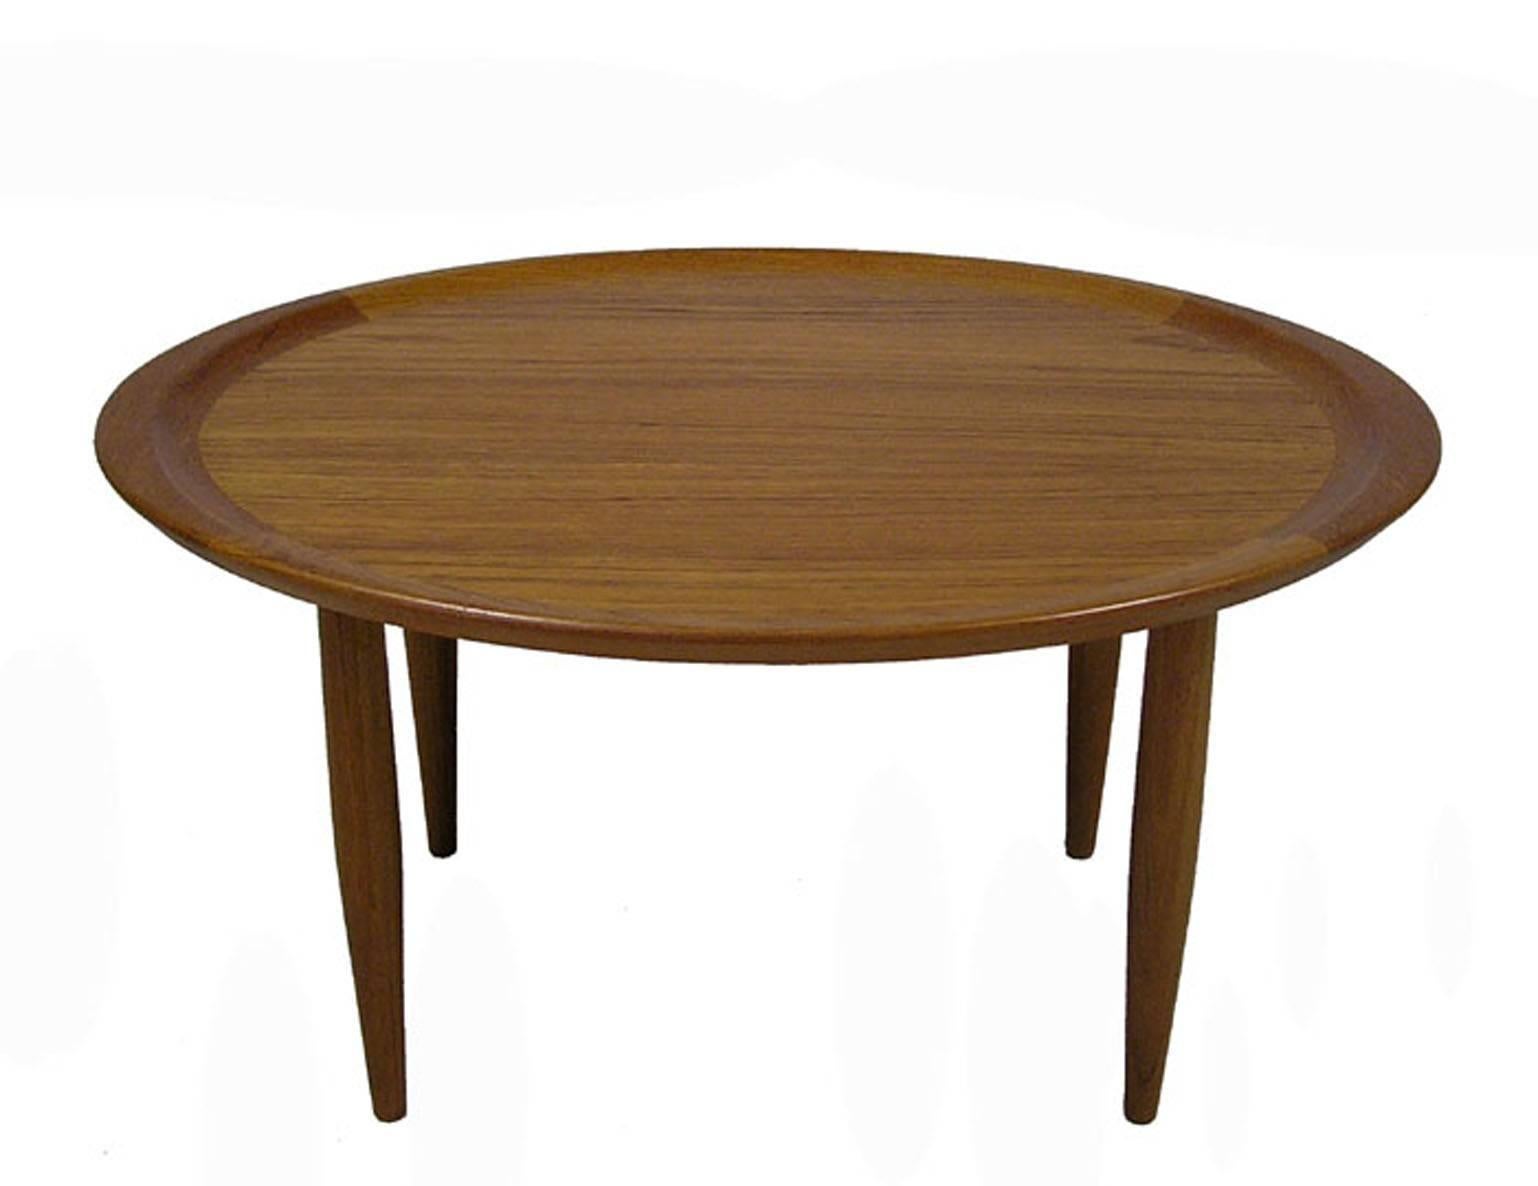 A gorgeous teak occasional side table from the 1960s Danish Modern era. Quality craftsmanship throughout featuring a thick solid teak band and tapered conical legs. Overall excellent condition.